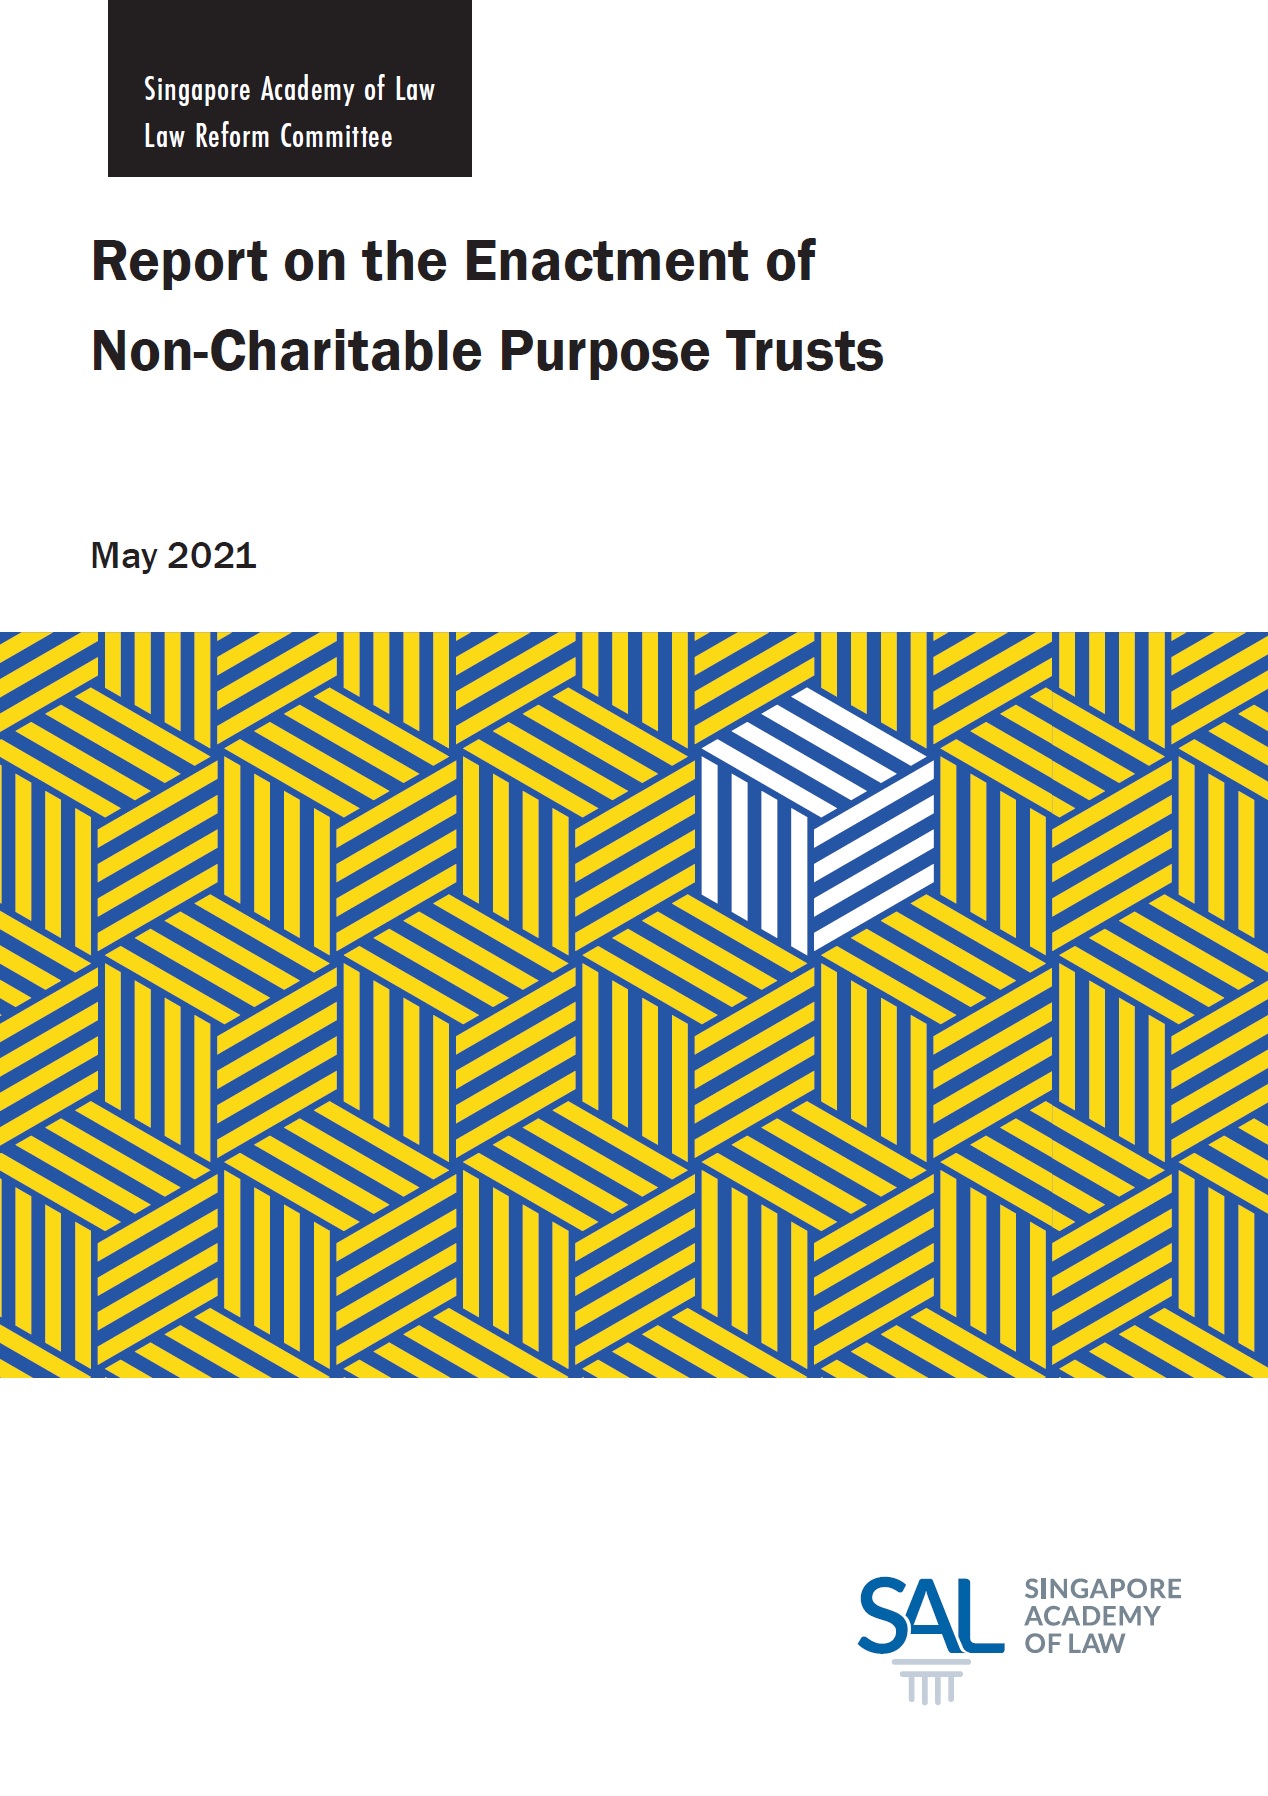 2021 Report on the Enactment of Non-Charitable Purpose Trusts - Click for Full Report